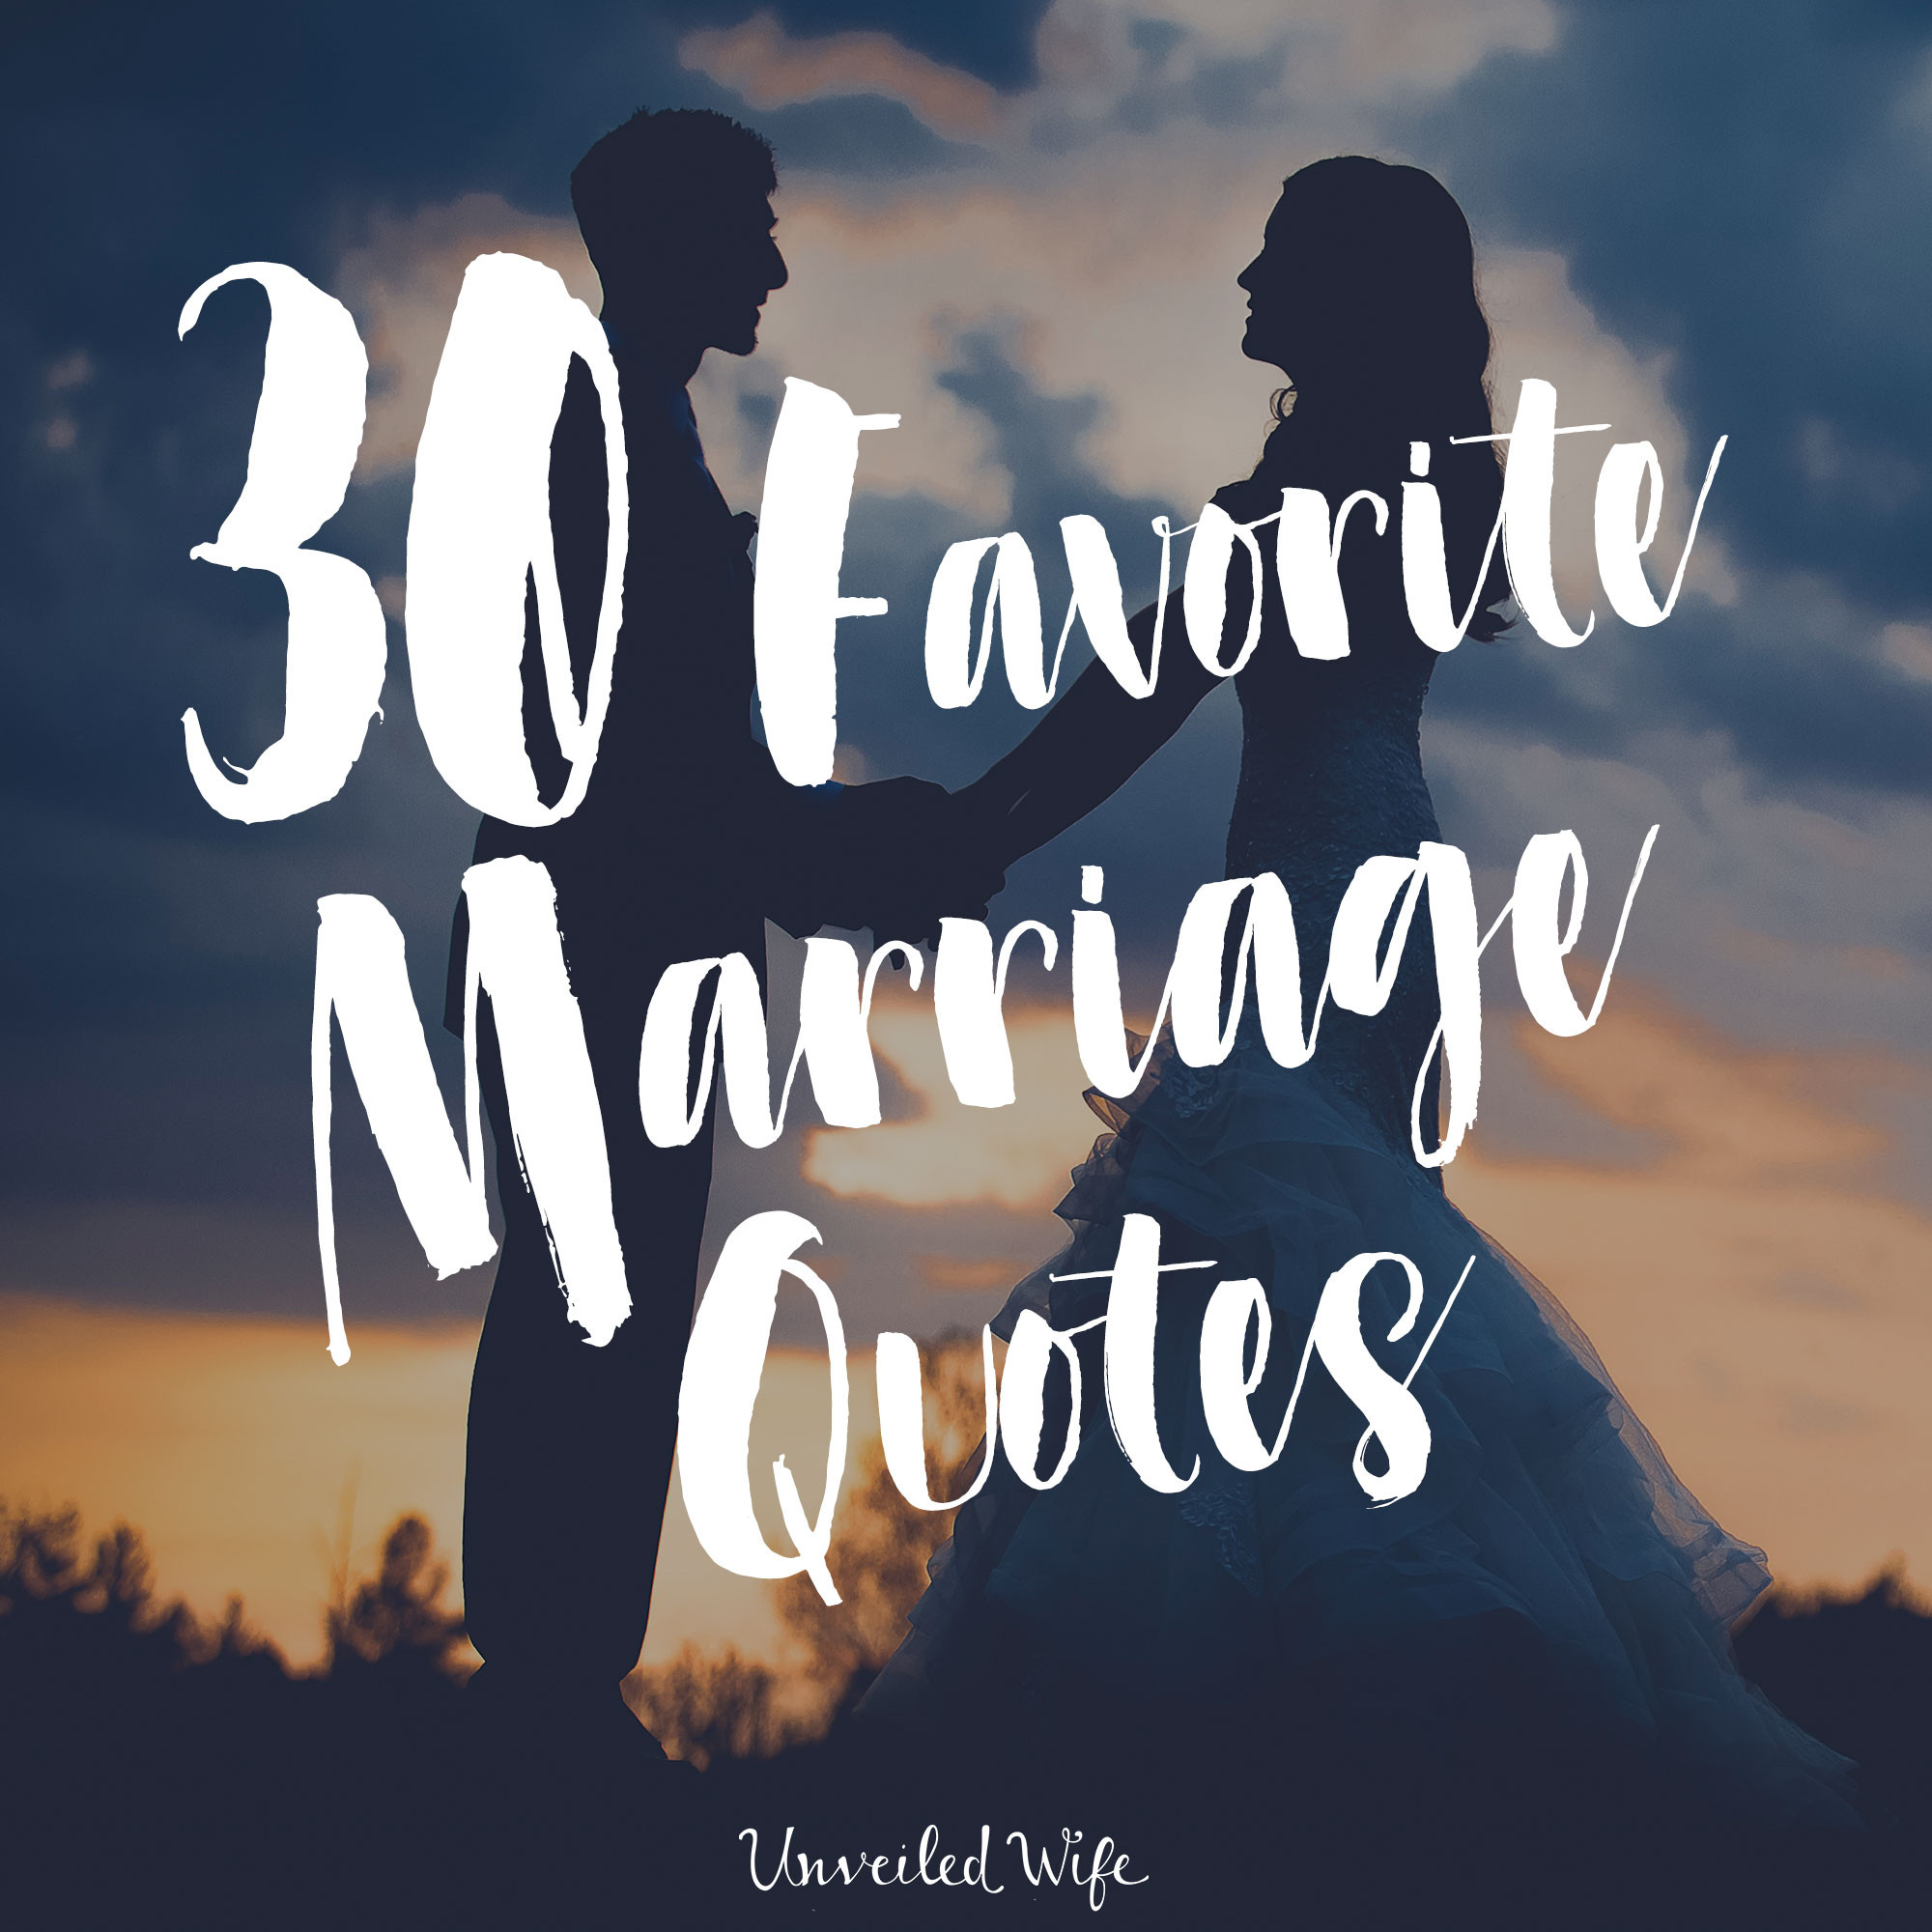 Bible Quotes For Marriage
 30 Favorite Marriage Quotes & Bible Verses